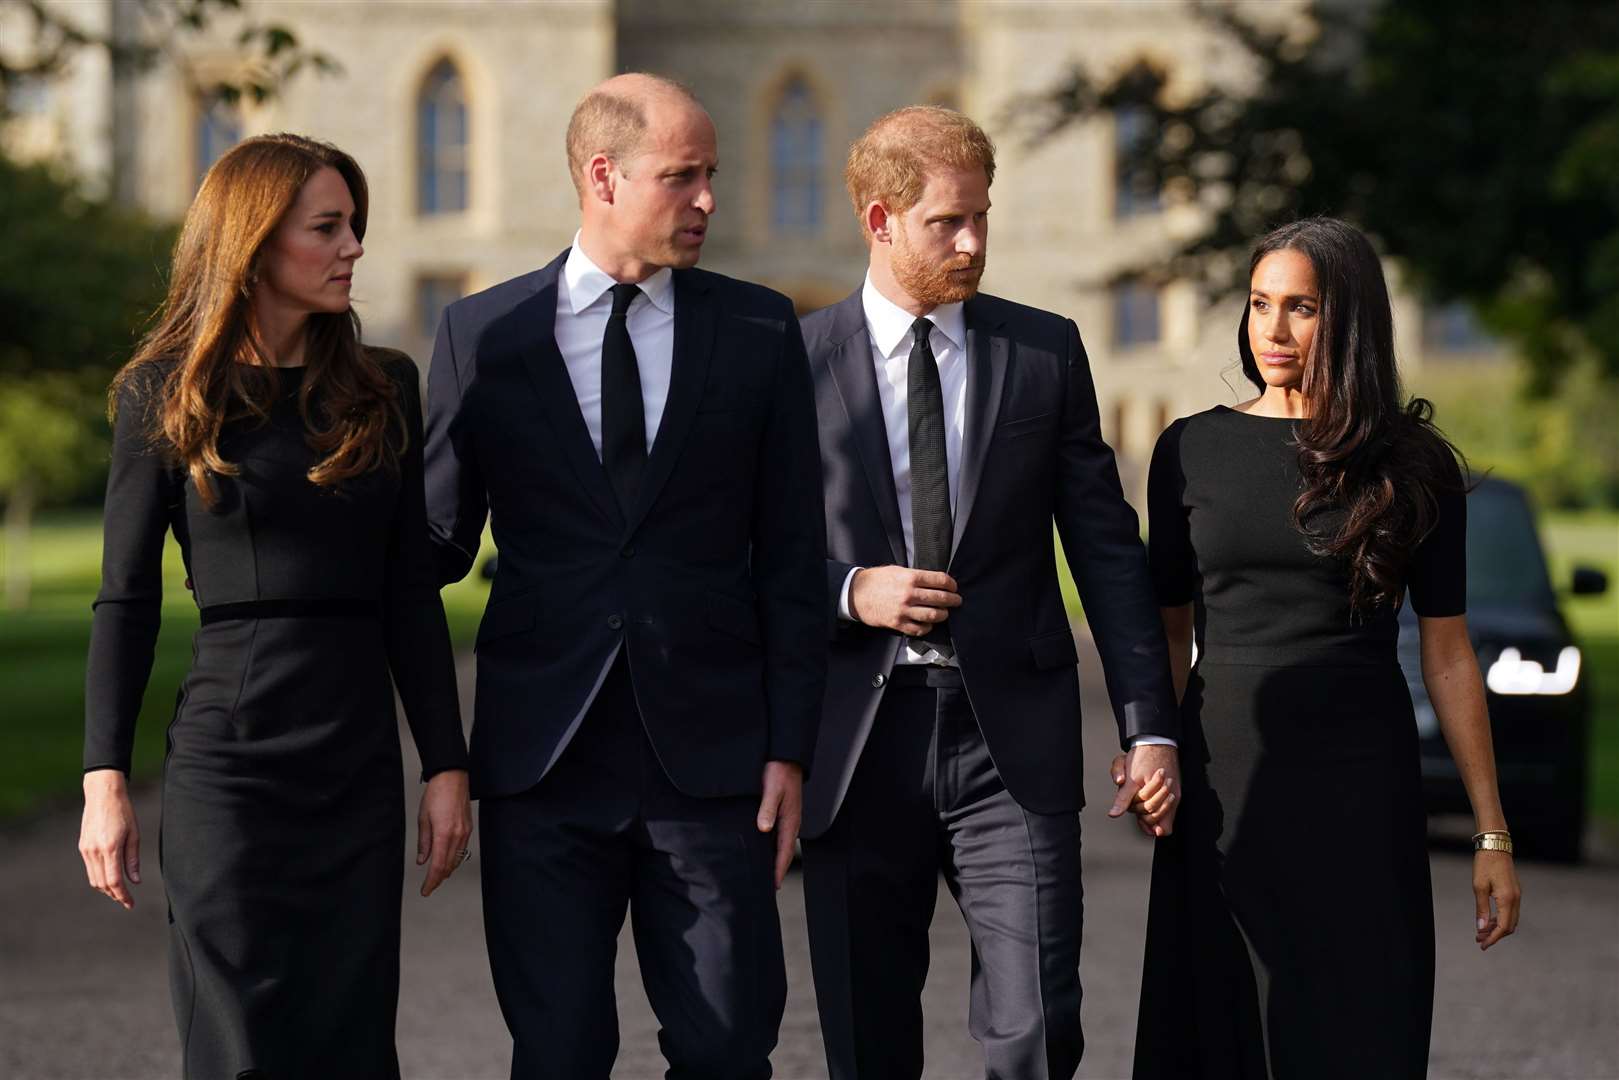 The Prince and Princess of Wales and the Duke and Duchess of Sussex arriving to view the messages and floral tributes left by members of the public at Windsor Castle in Berkshire (Chris Jackson/PA)